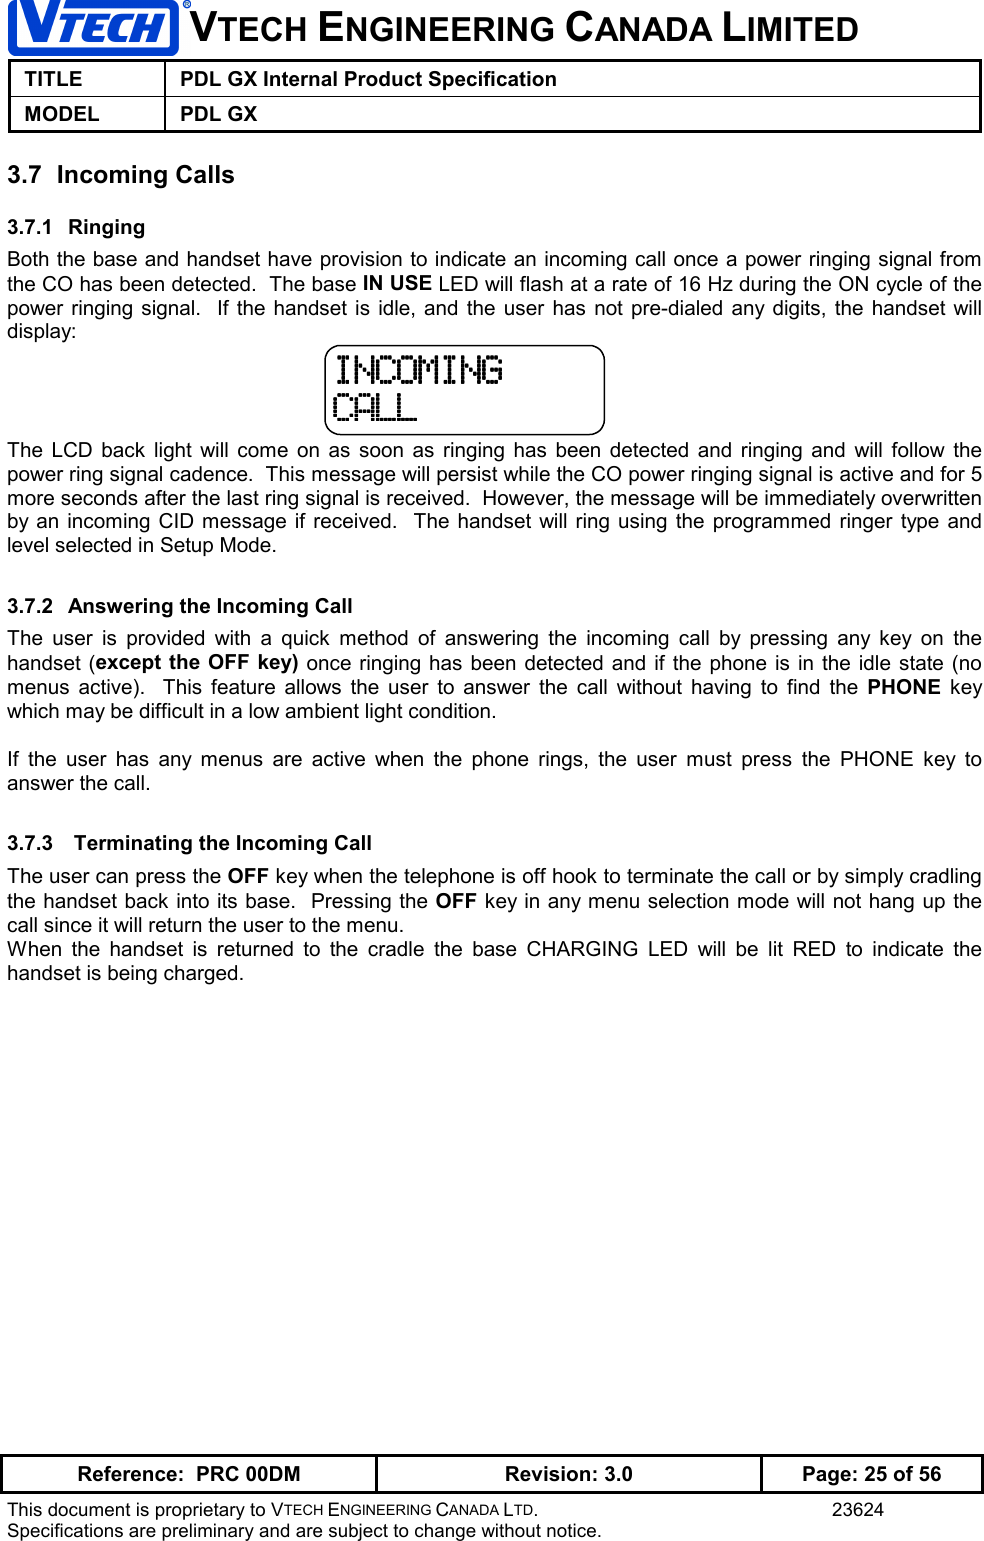 VTECH ENGINEERING CANADA LIMITEDTITLE PDL GX Internal Product SpecificationMODEL PDL GXReference:  PRC 00DM Revision: 3.0 Page: 25 of 56This document is proprietary to VTECH ENGINEERING CANADA LTD. 23624Specifications are preliminary and are subject to change without notice.3.7 Incoming Calls3.7.1 RingingBoth the base and handset have provision to indicate an incoming call once a power ringing signal fromthe CO has been detected.  The base IN USE LED will flash at a rate of 16 Hz during the ON cycle of thepower ringing signal.  If the handset is idle, and the user has not pre-dialed any digits, the handset willdisplay:The LCD back light will come on as soon as ringing has been detected and ringing and will follow thepower ring signal cadence.  This message will persist while the CO power ringing signal is active and for 5more seconds after the last ring signal is received.  However, the message will be immediately overwrittenby an incoming CID message if received.  The handset will ring using the programmed ringer type andlevel selected in Setup Mode.3.7.2  Answering the Incoming CallThe user is provided with a quick method of answering the incoming call by pressing any key on thehandset (except the OFF key) once ringing has been detected and if the phone is in the idle state (nomenus active).  This feature allows the user to answer the call without having to find the PHONE keywhich may be difficult in a low ambient light condition.If the user has any menus are active when the phone rings, the user must press the PHONE key toanswer the call.3.7.3   Terminating the Incoming CallThe user can press the OFF key when the telephone is off hook to terminate the call or by simply cradlingthe handset back into its base.  Pressing the OFF key in any menu selection mode will not hang up thecall since it will return the user to the menu.When the handset is returned to the cradle the base CHARGING LED will be lit RED to indicate thehandset is being charged.INCOMINGINCOMINGINCOMINGINCOMINGCALLCALLCALLCALL